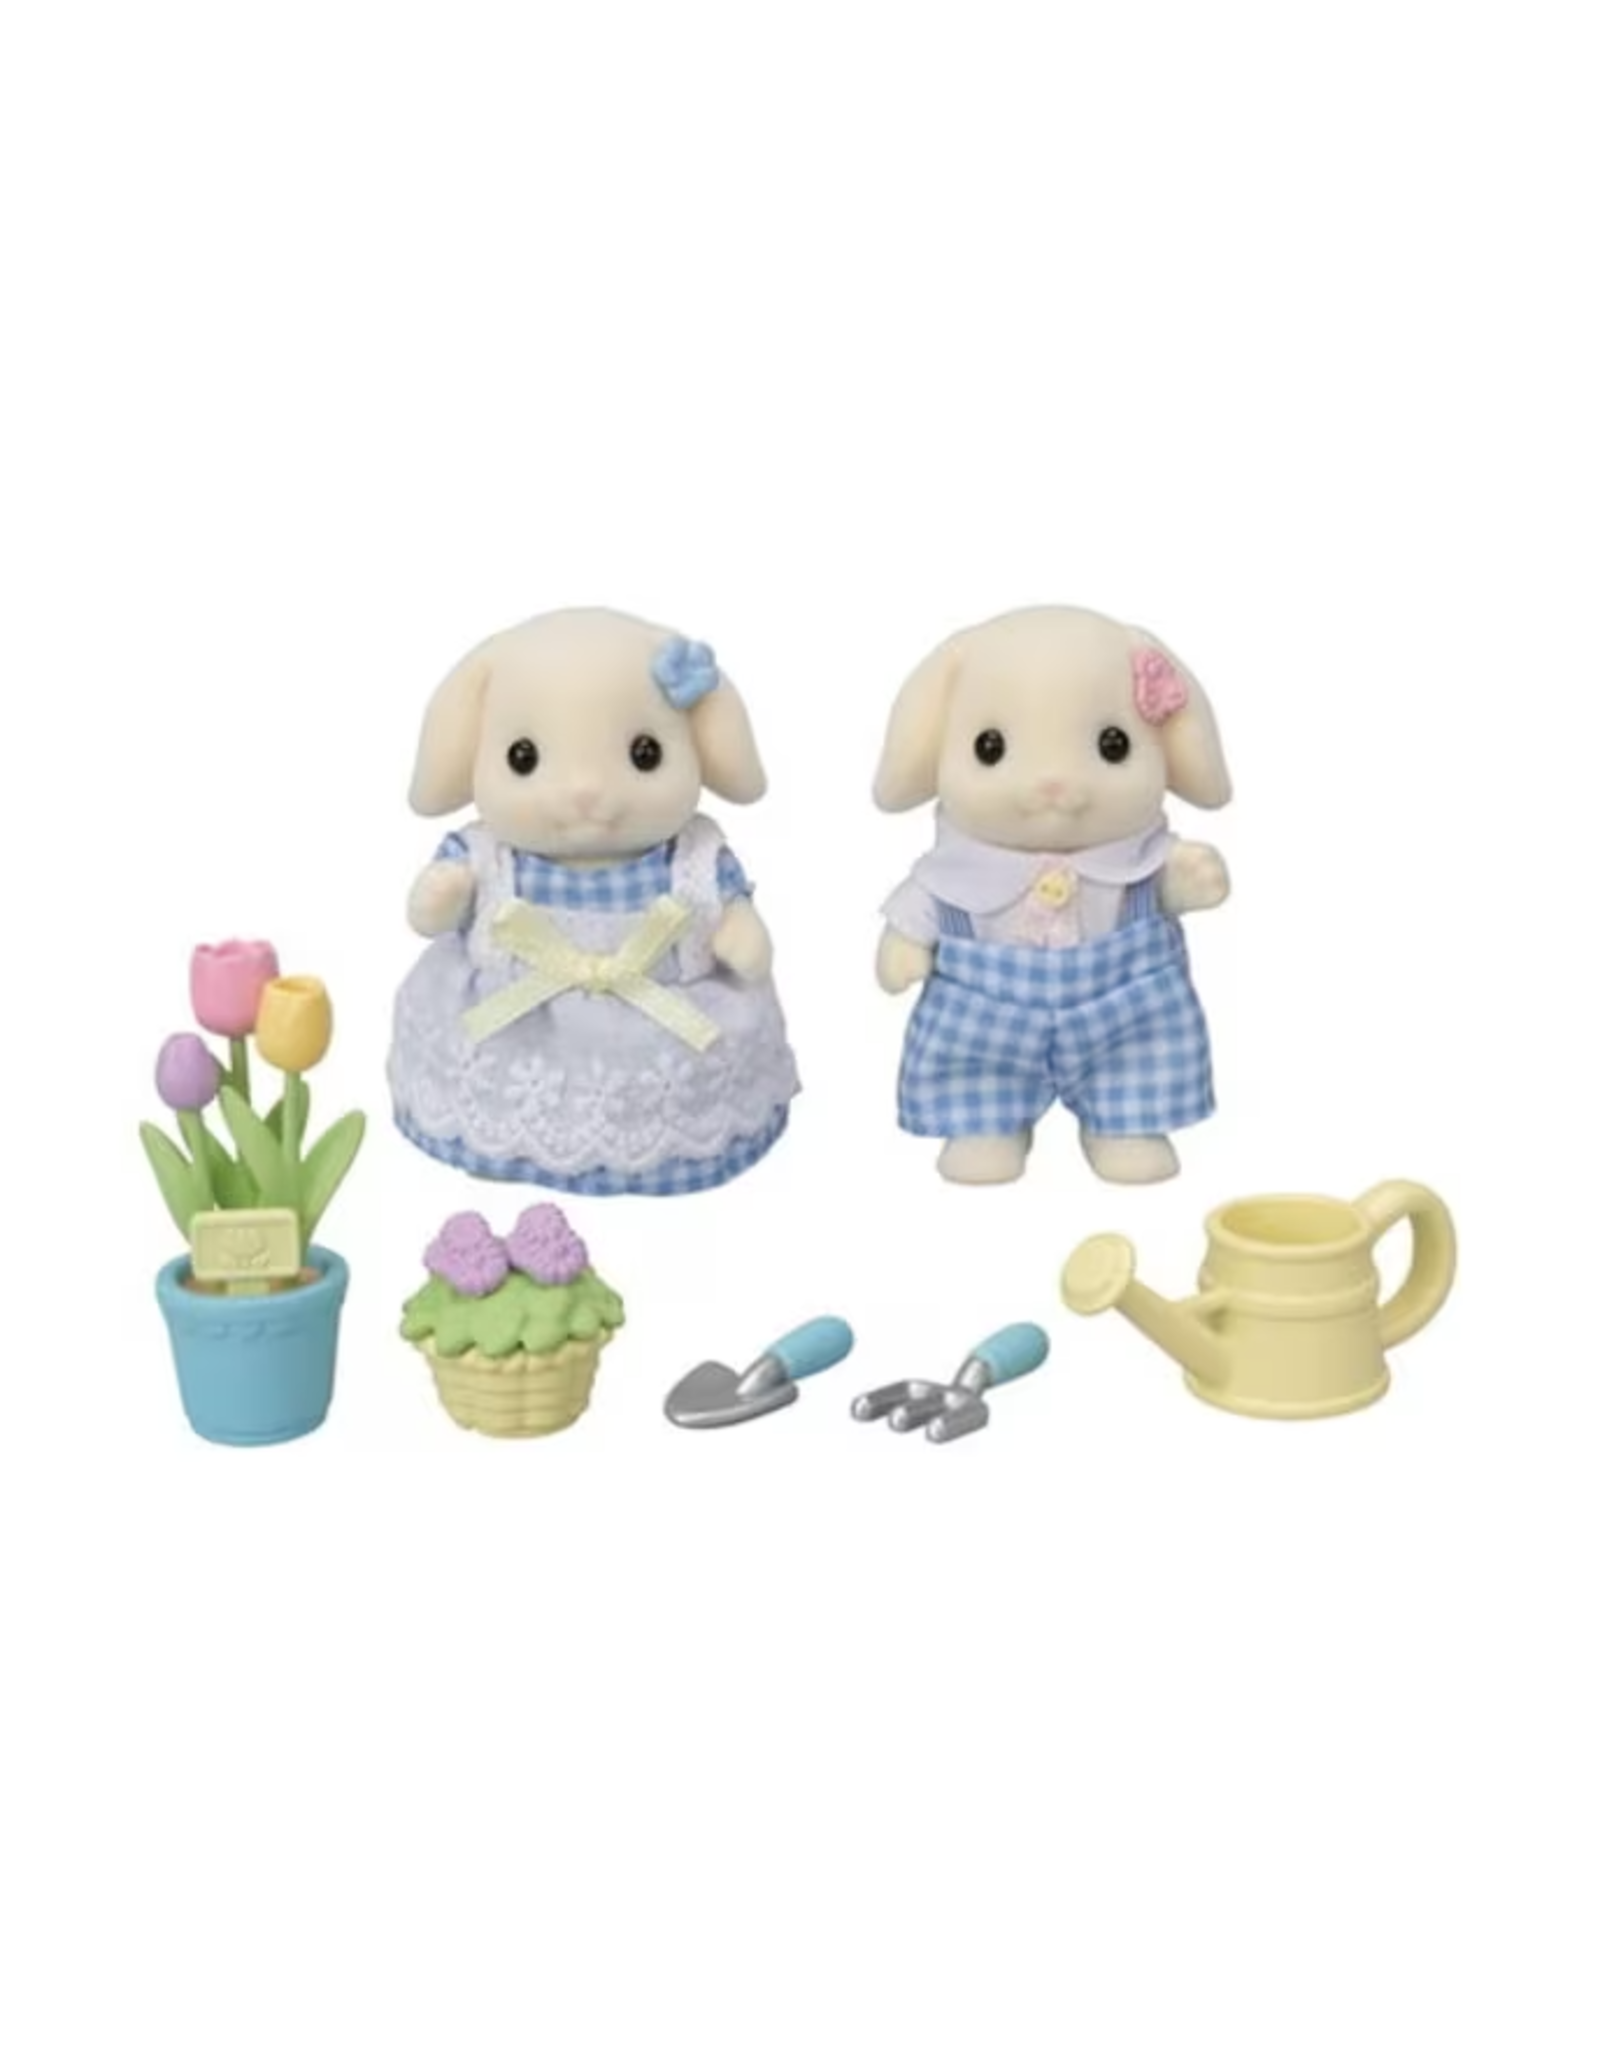 Calico Critters Calico Critters Blossoming Garden Set